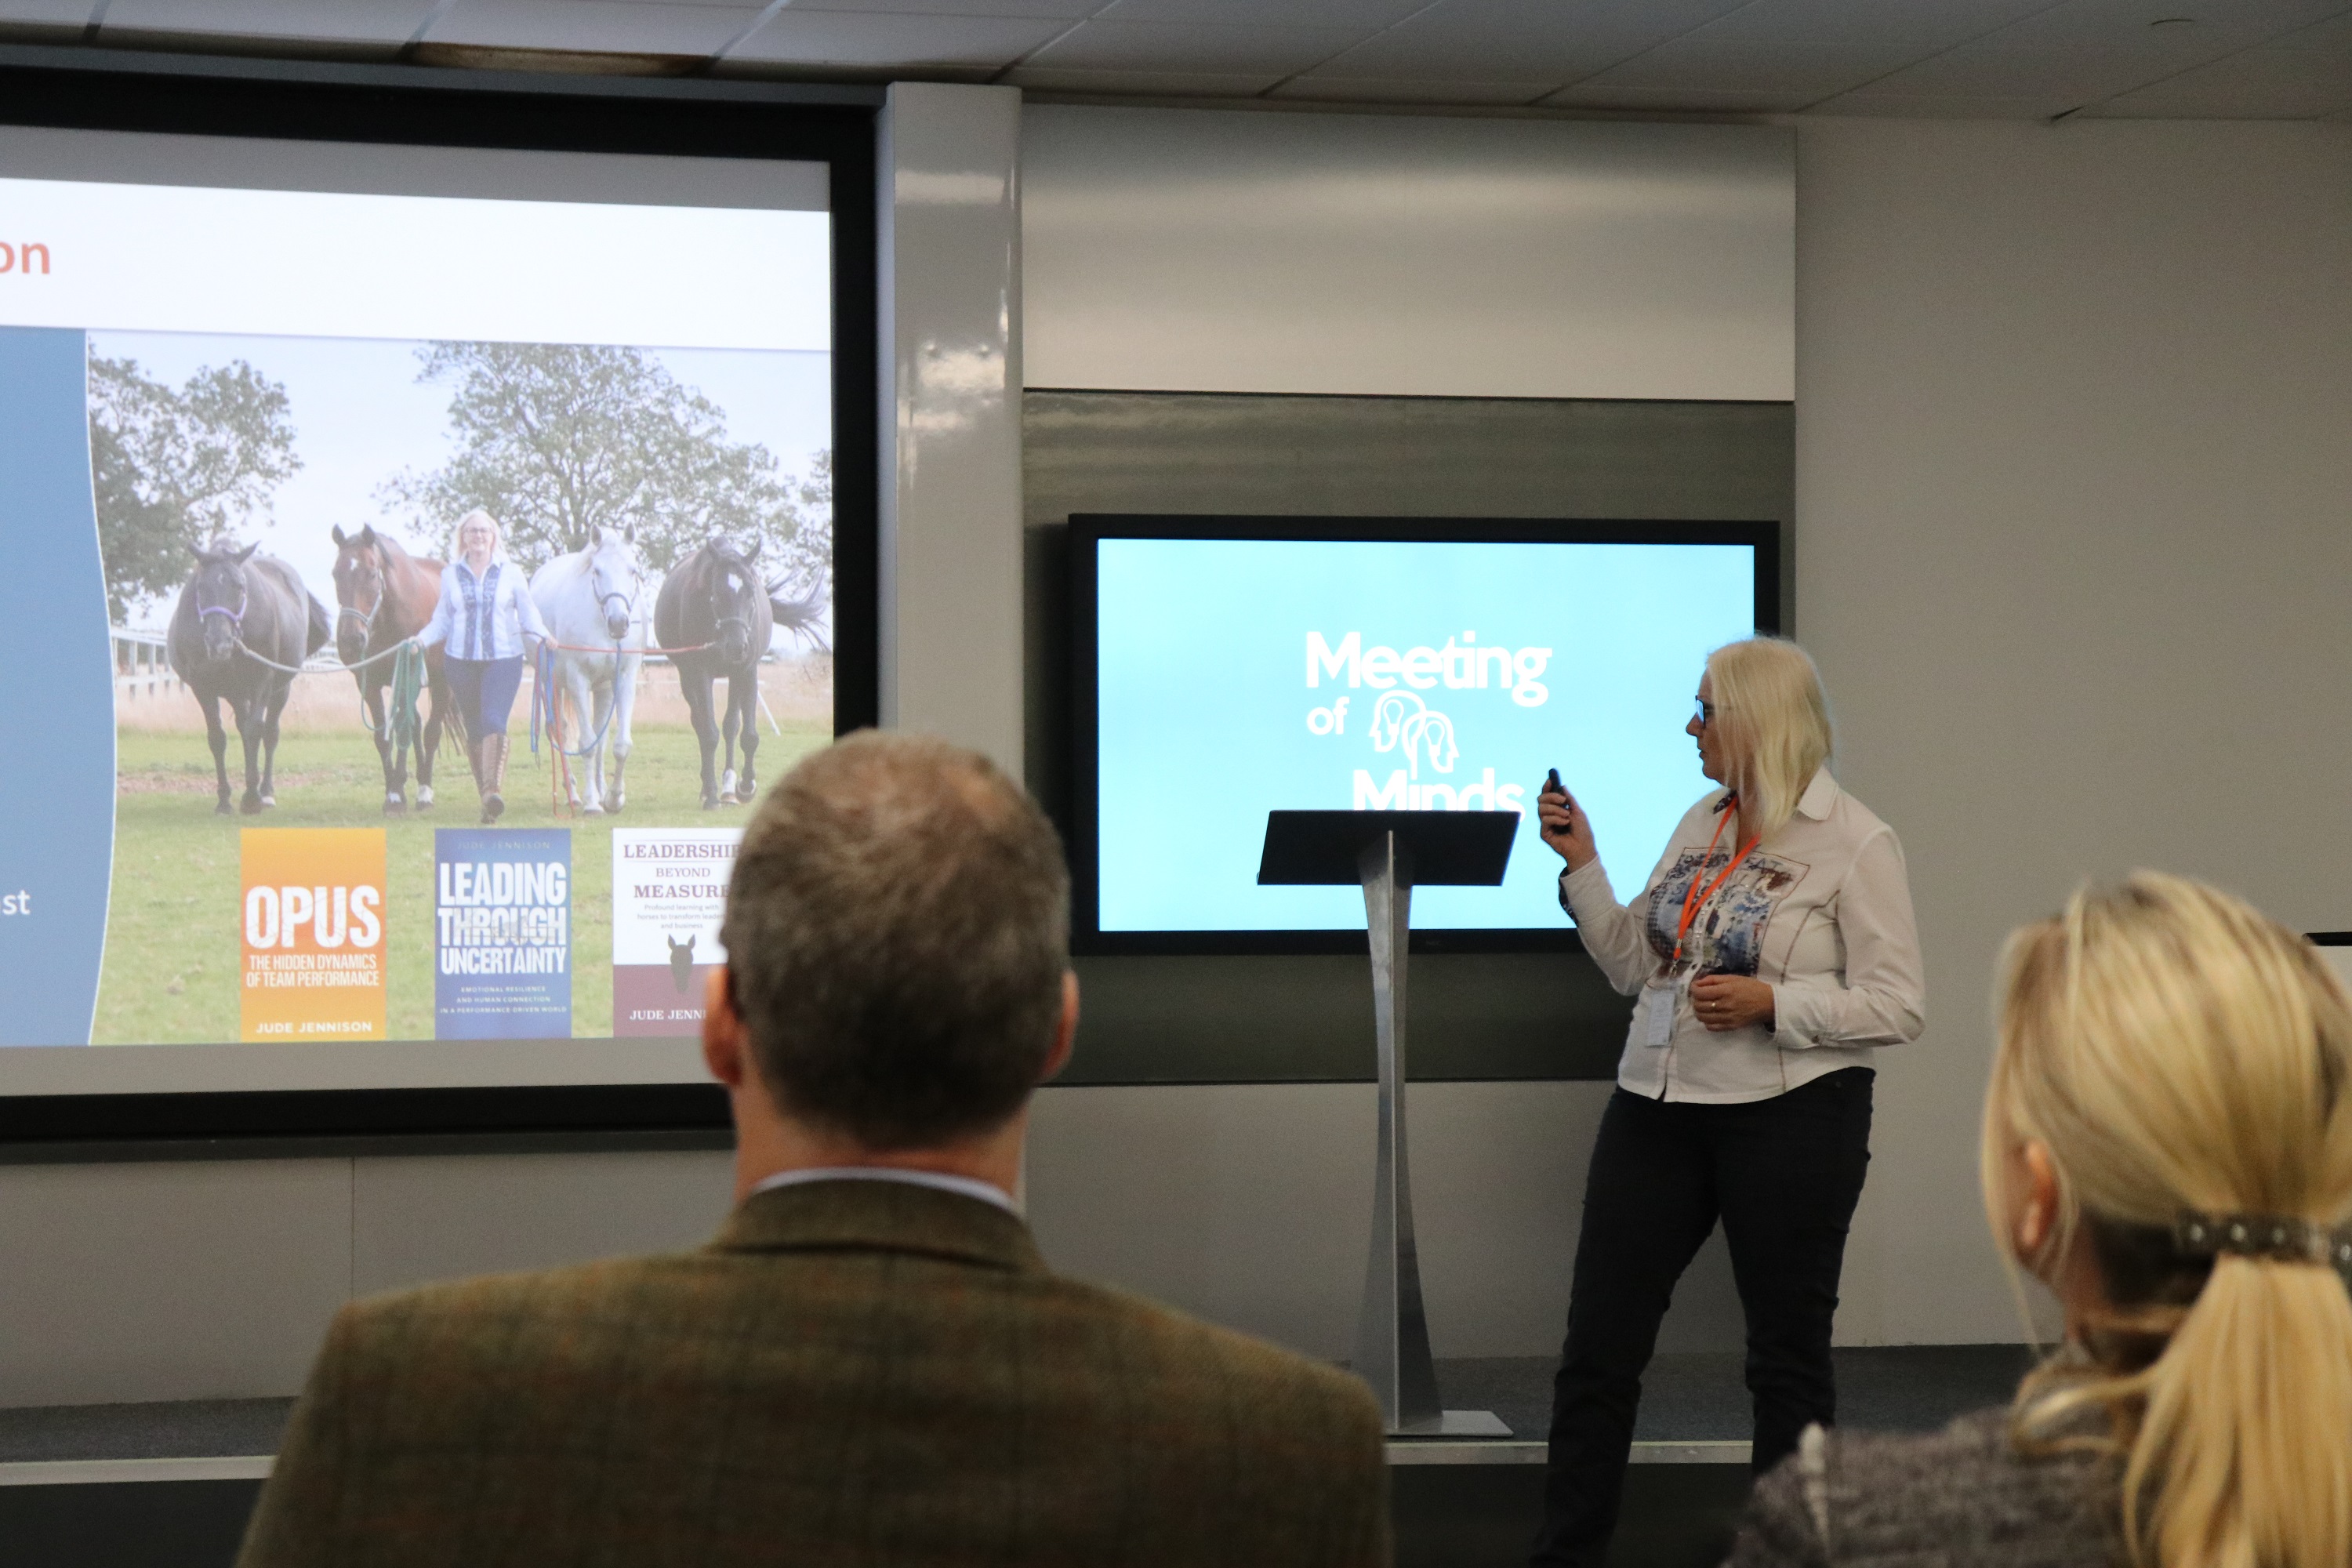 Leamington event highlights insights into non-verbal communications based on work with a herd of horses